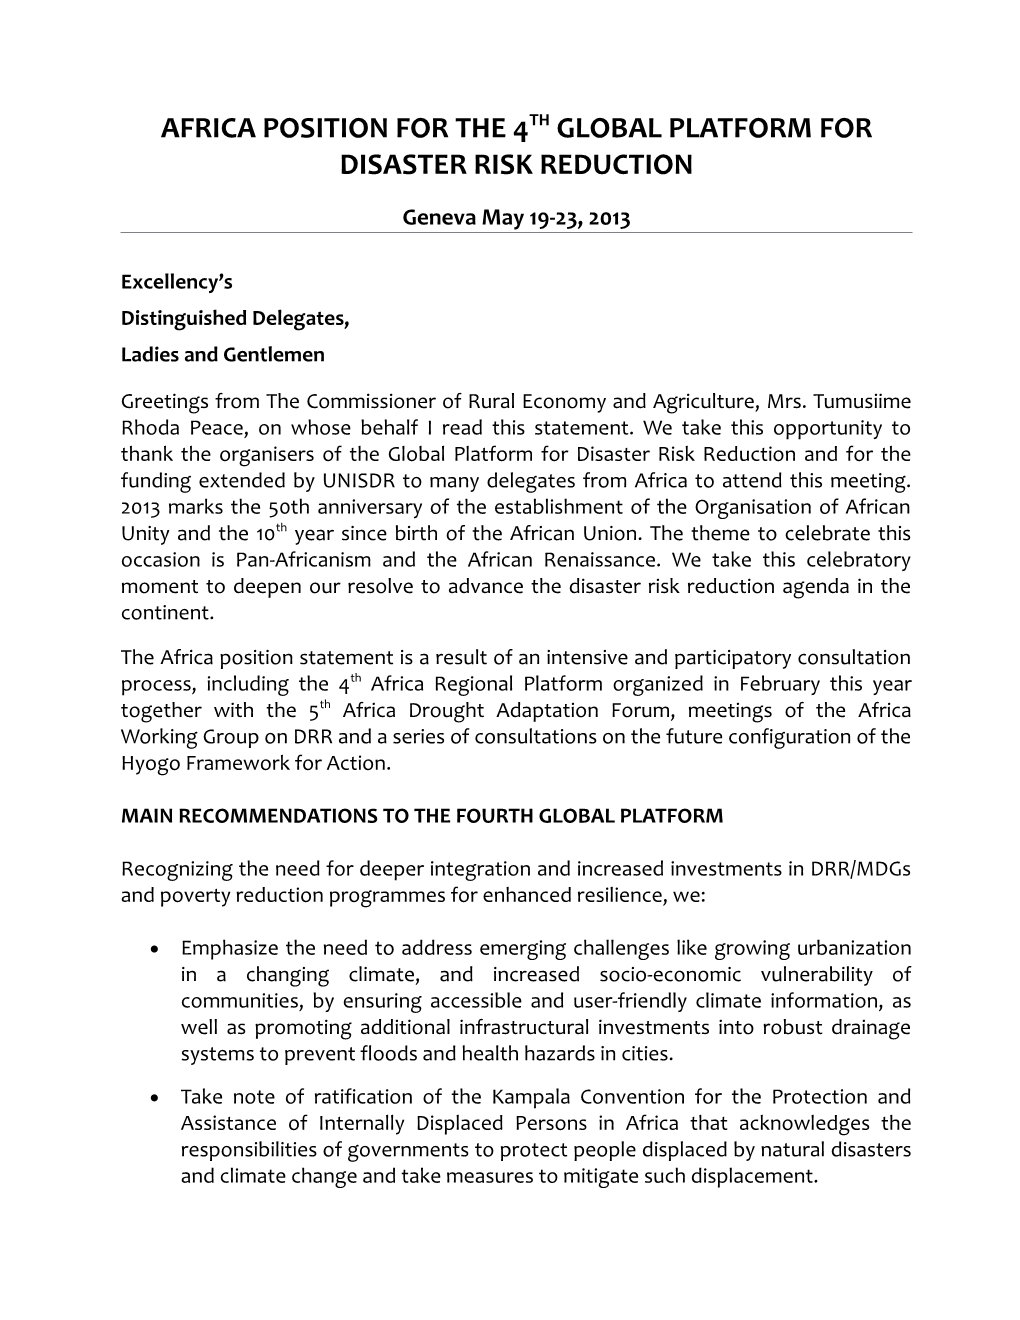 Africa Position for the 4Th Global Platform for Disaster Risk Reduction